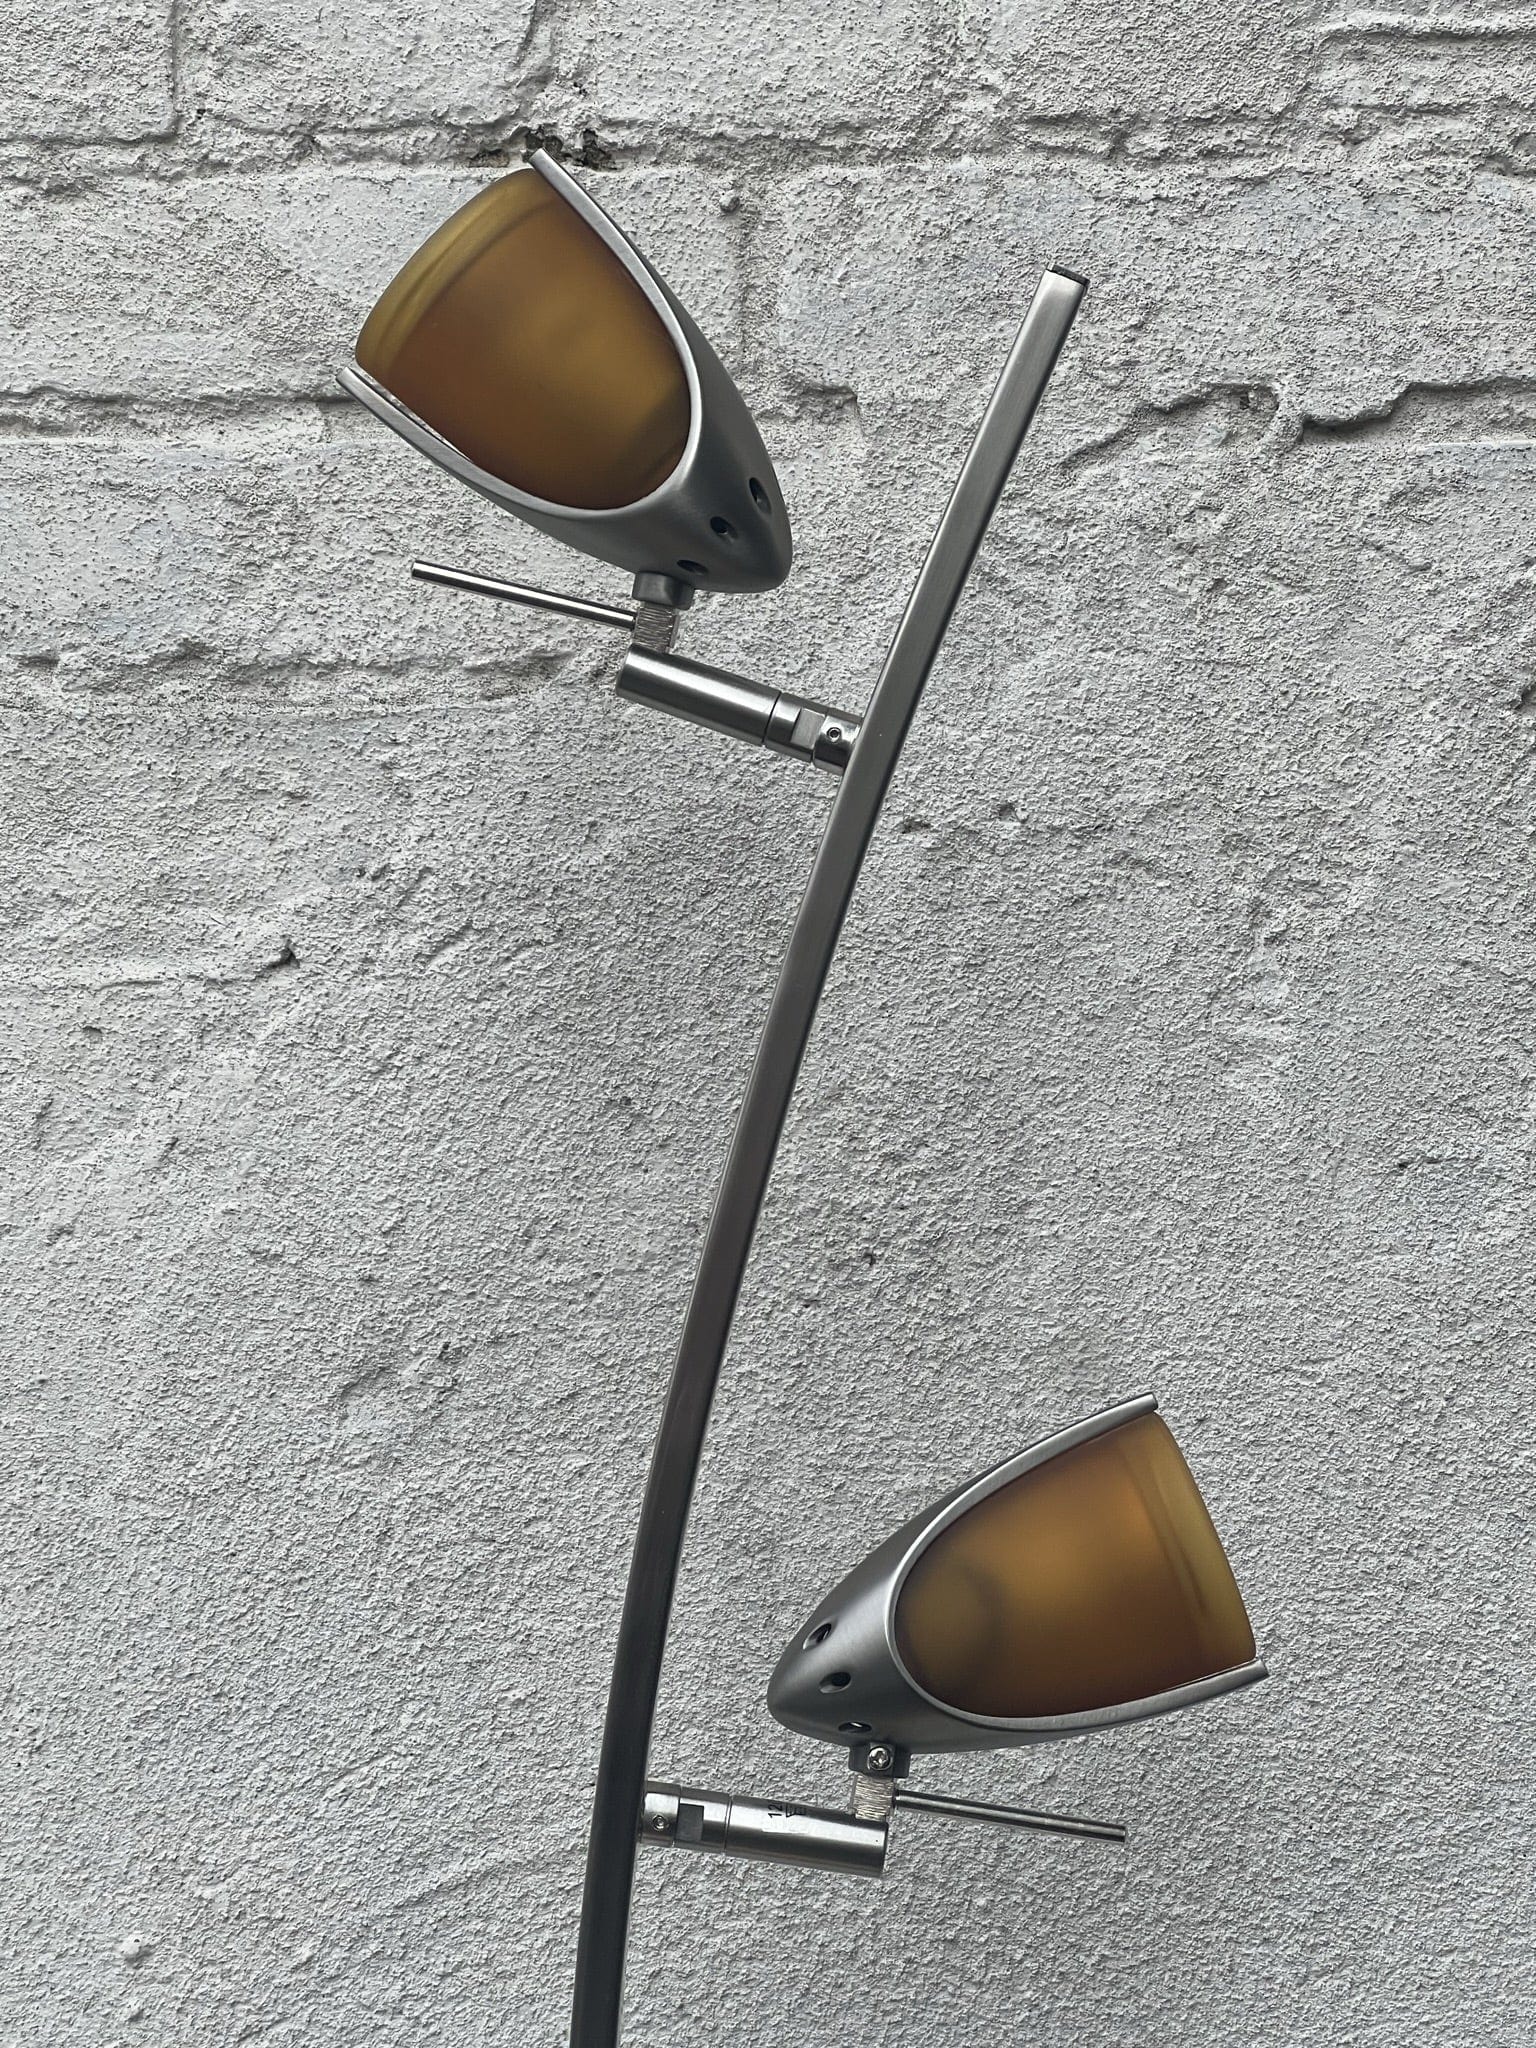 I Like Mike's Mid Century Modern lighting Slim Modern Vintage Tulip Floor Lamp, 1990's, Two Lights, Compact, New Old Stock, Blue (or Amber) Glass